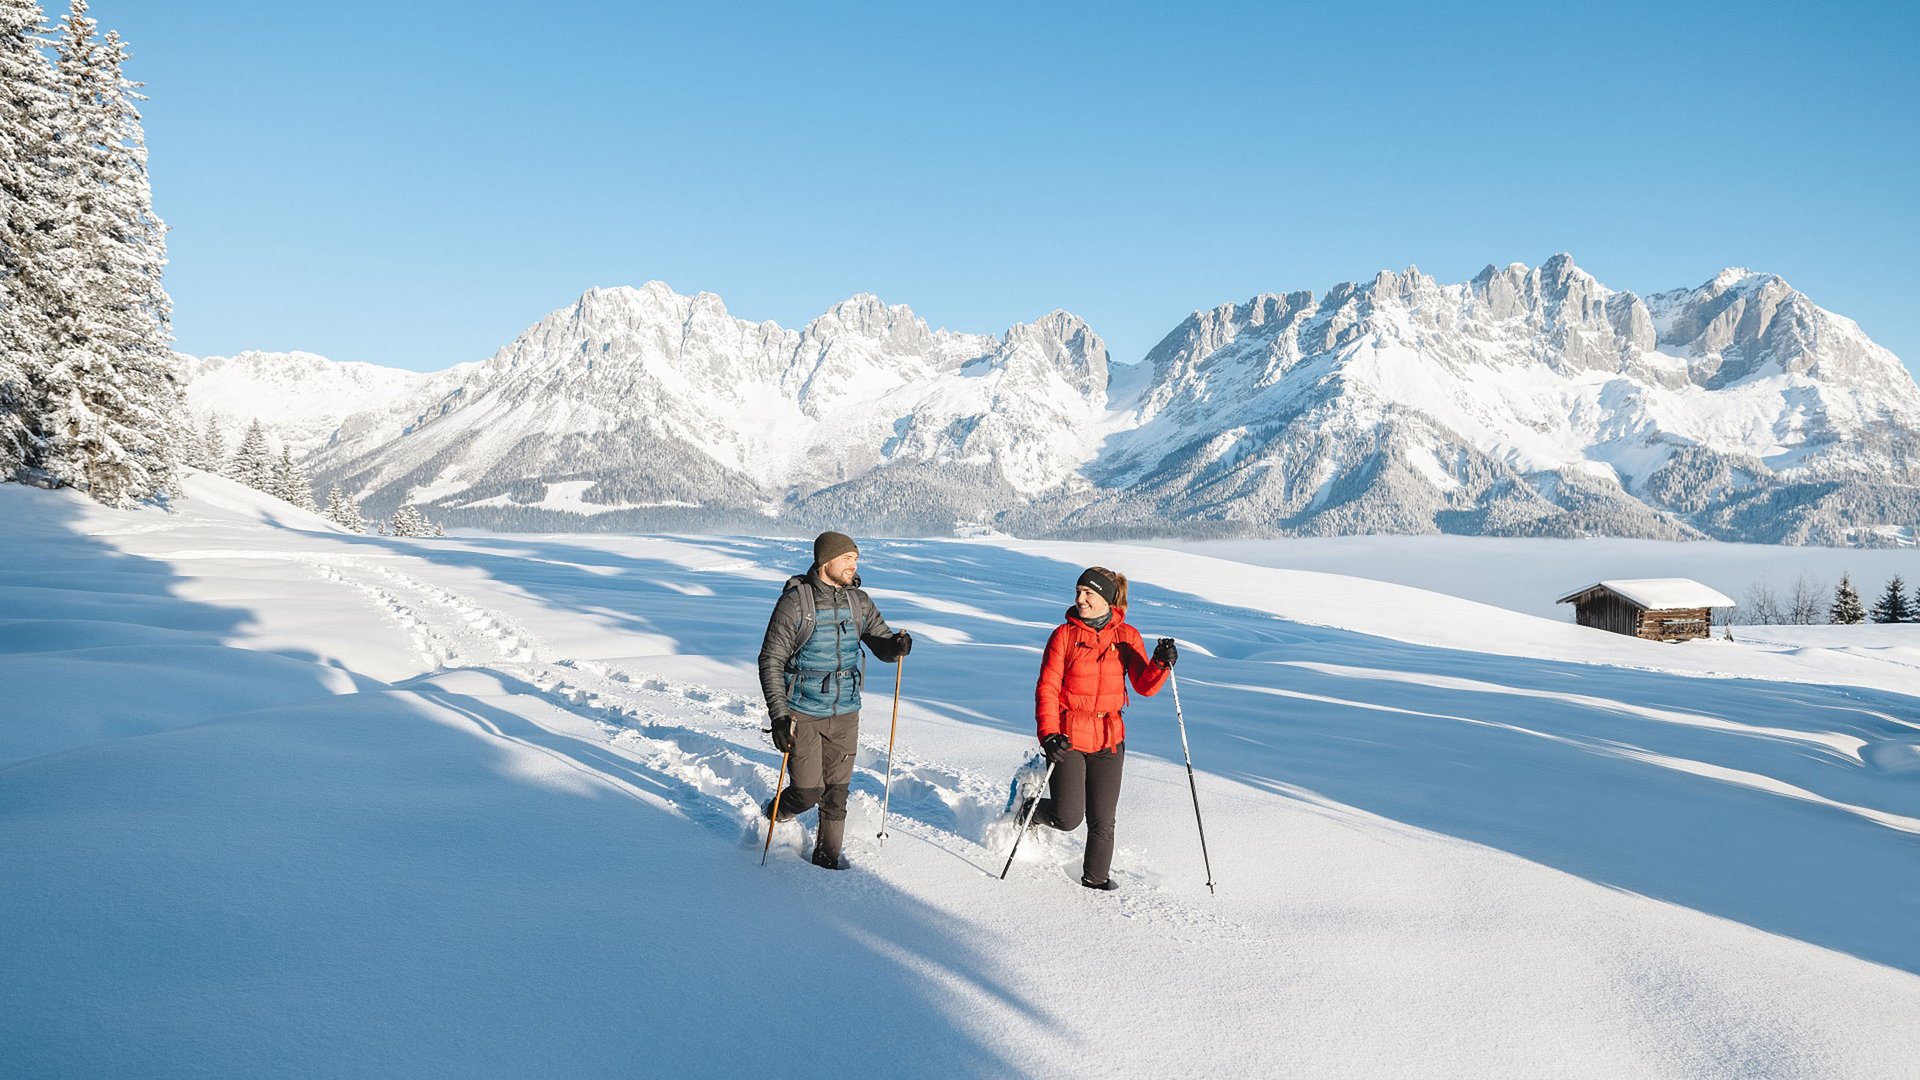 Discover the benefits of the Wilder Kaiser GästeCard that can be used throughout the area